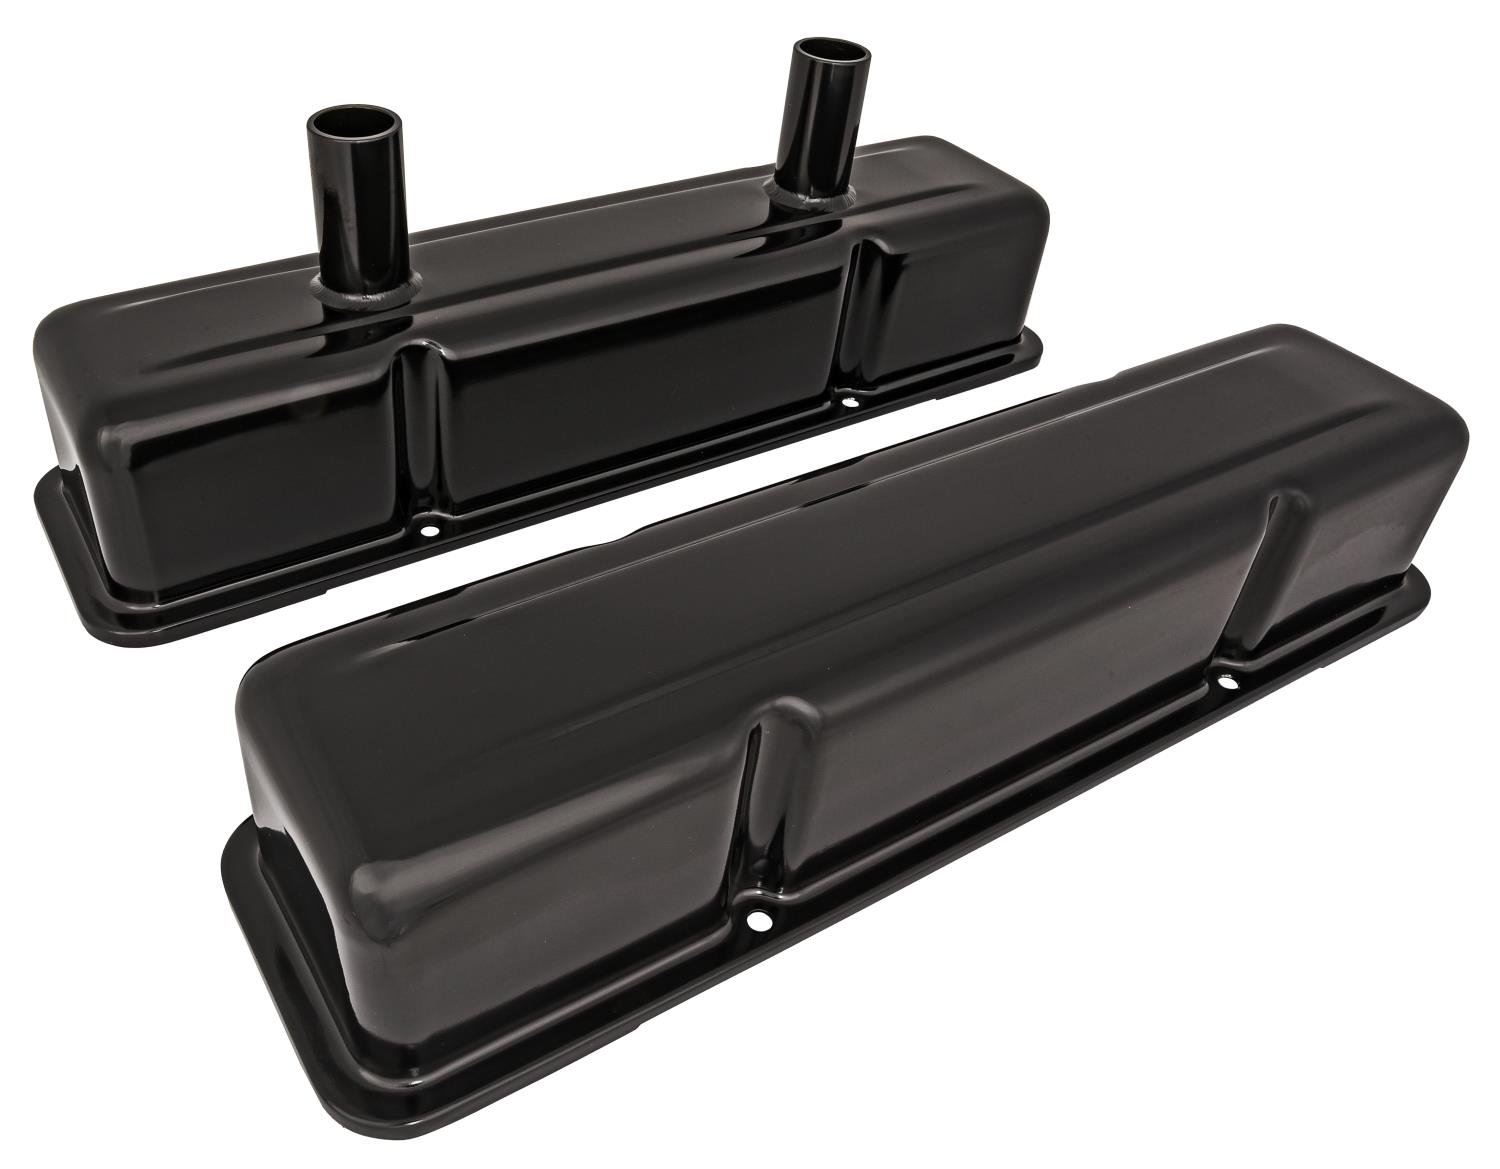 Circle Track Valve Covers for 1958-1986 Small Block Chevy 283, 305, 327, 350, 400, [Stamped Light Weight Aluminum, Black]